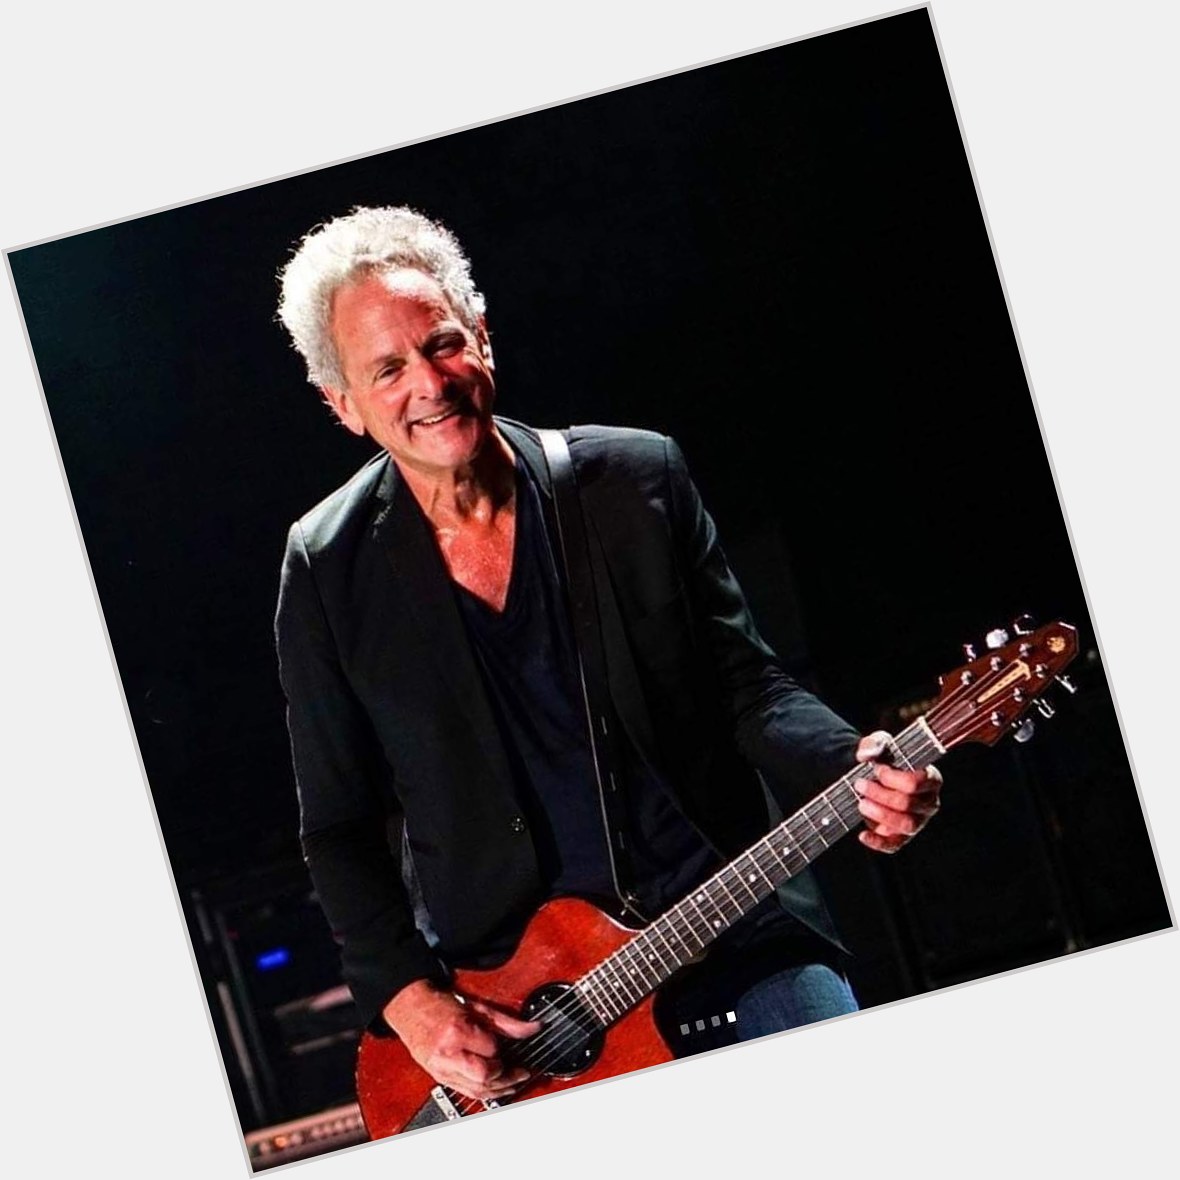 Happy birthday with love and gratitude to one of my musical heroes, Lindsey Buckingham 